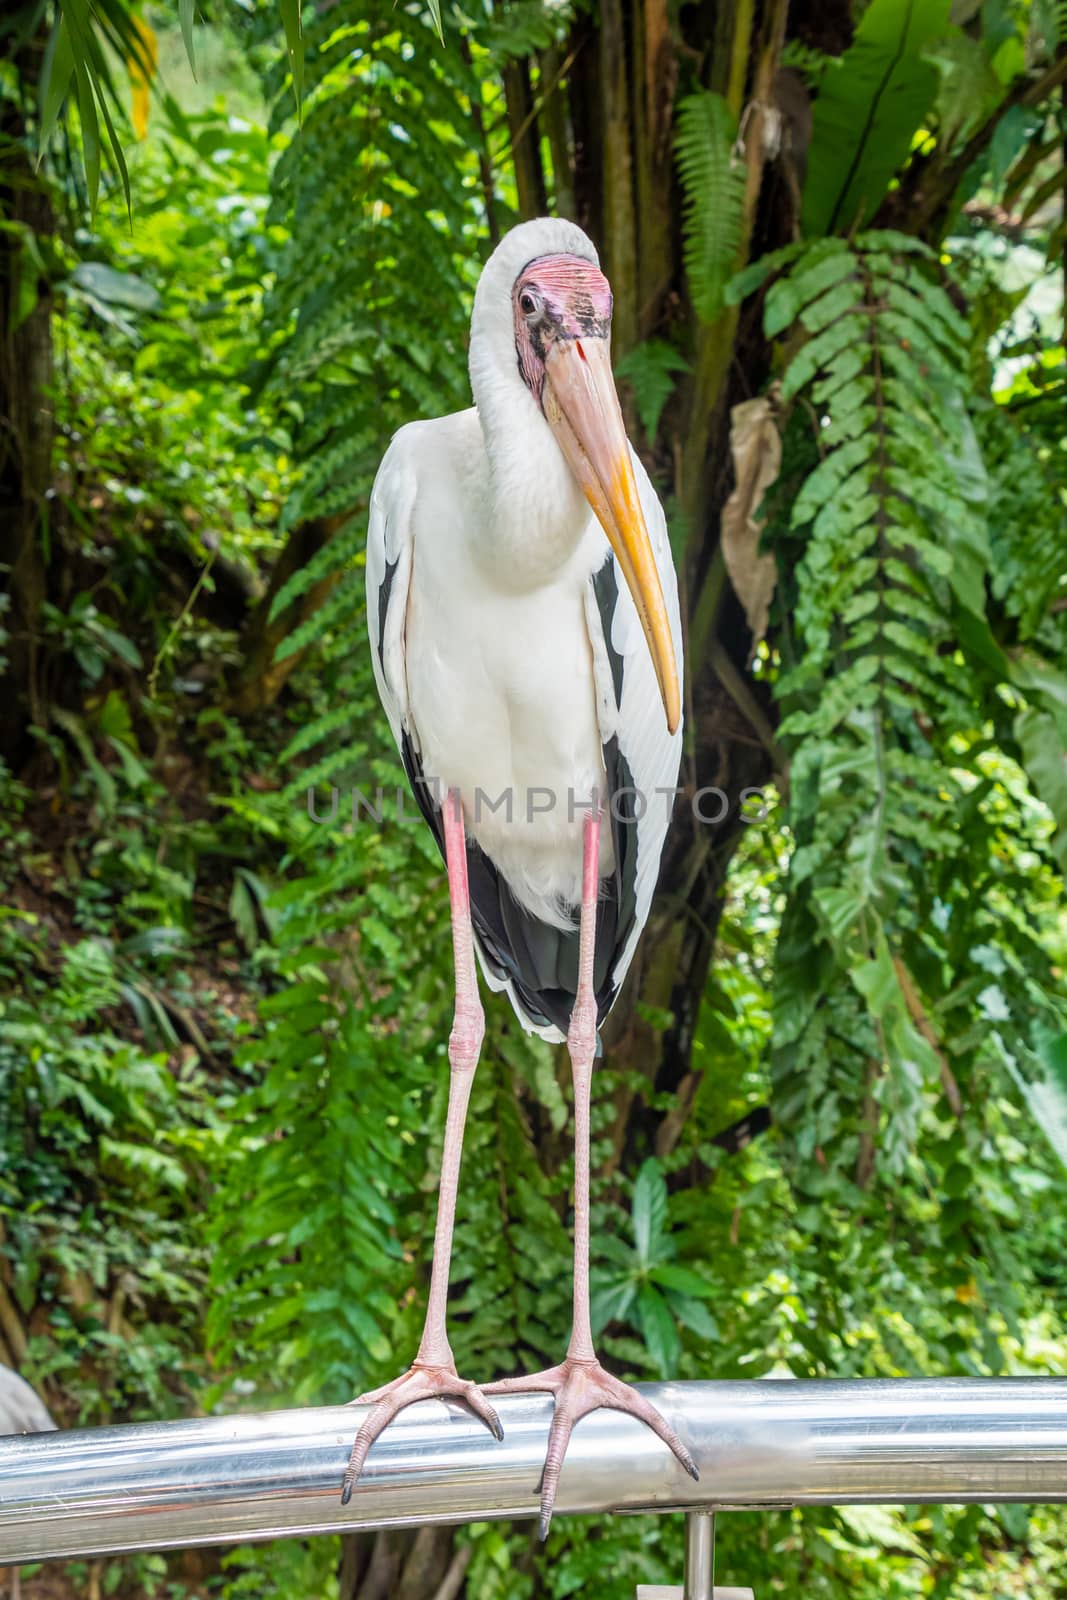 Yellow-billed stork in front of rain forest vegetation in Asia